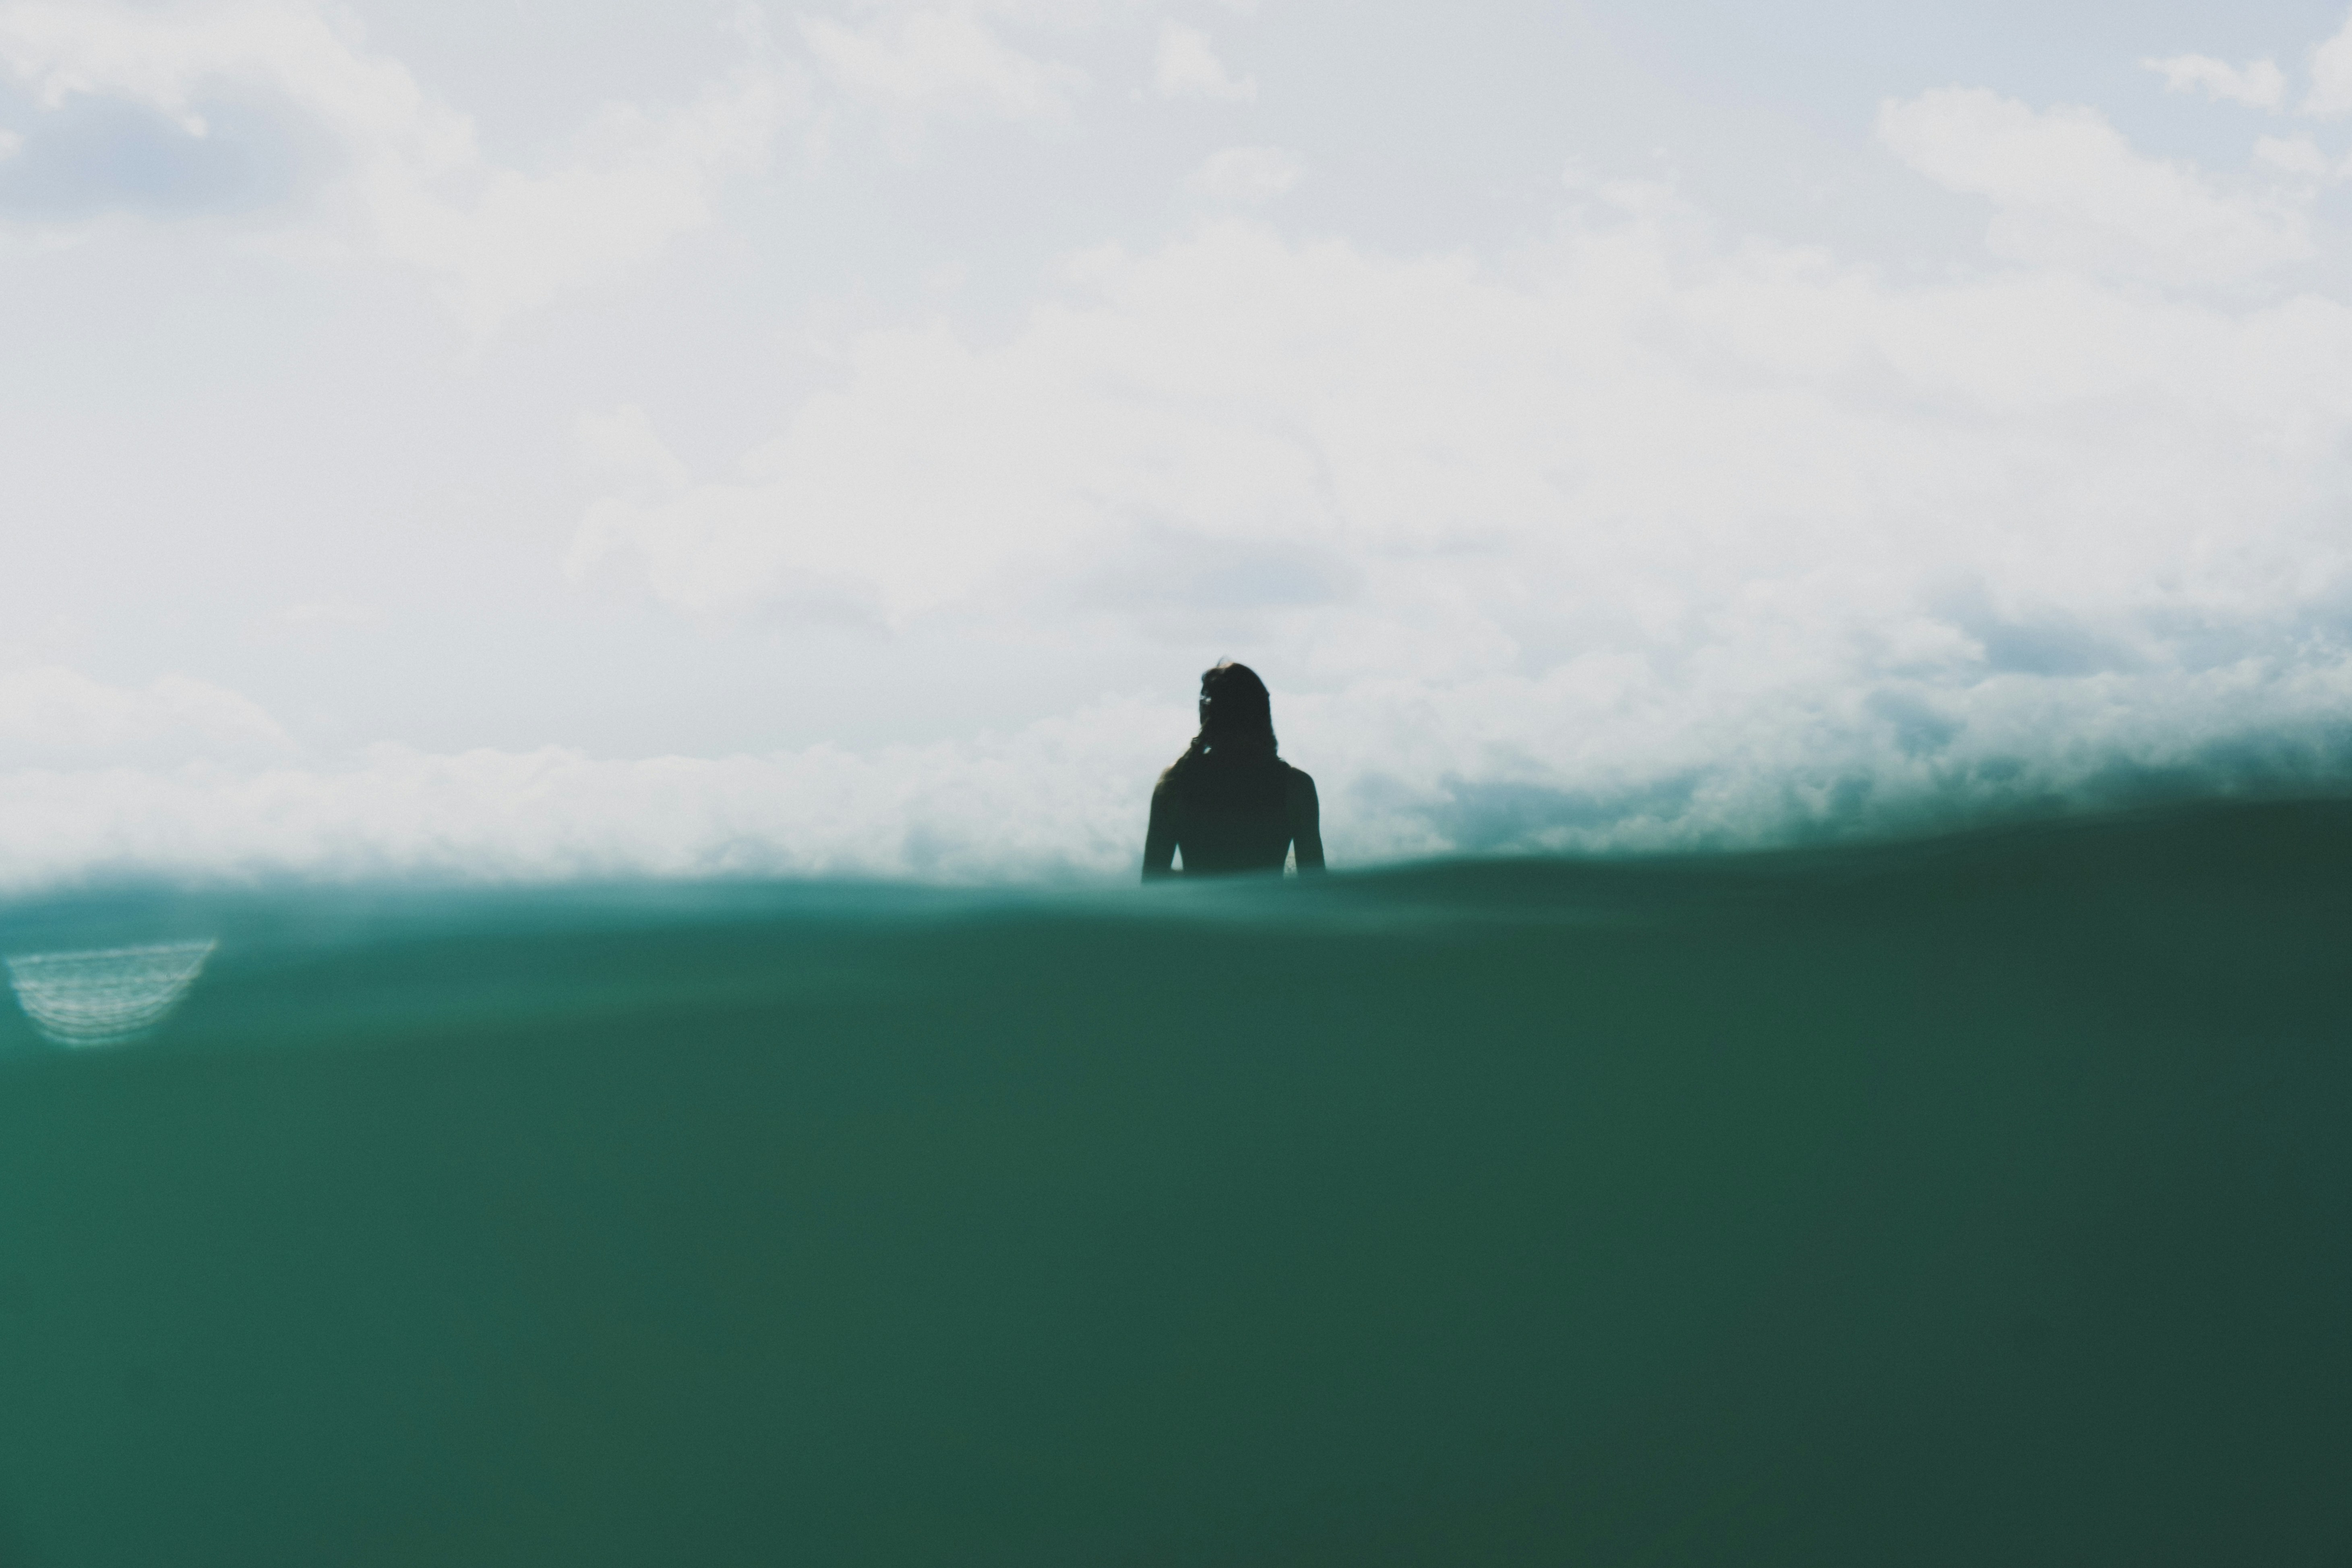 A silhouette of a surfer woman.